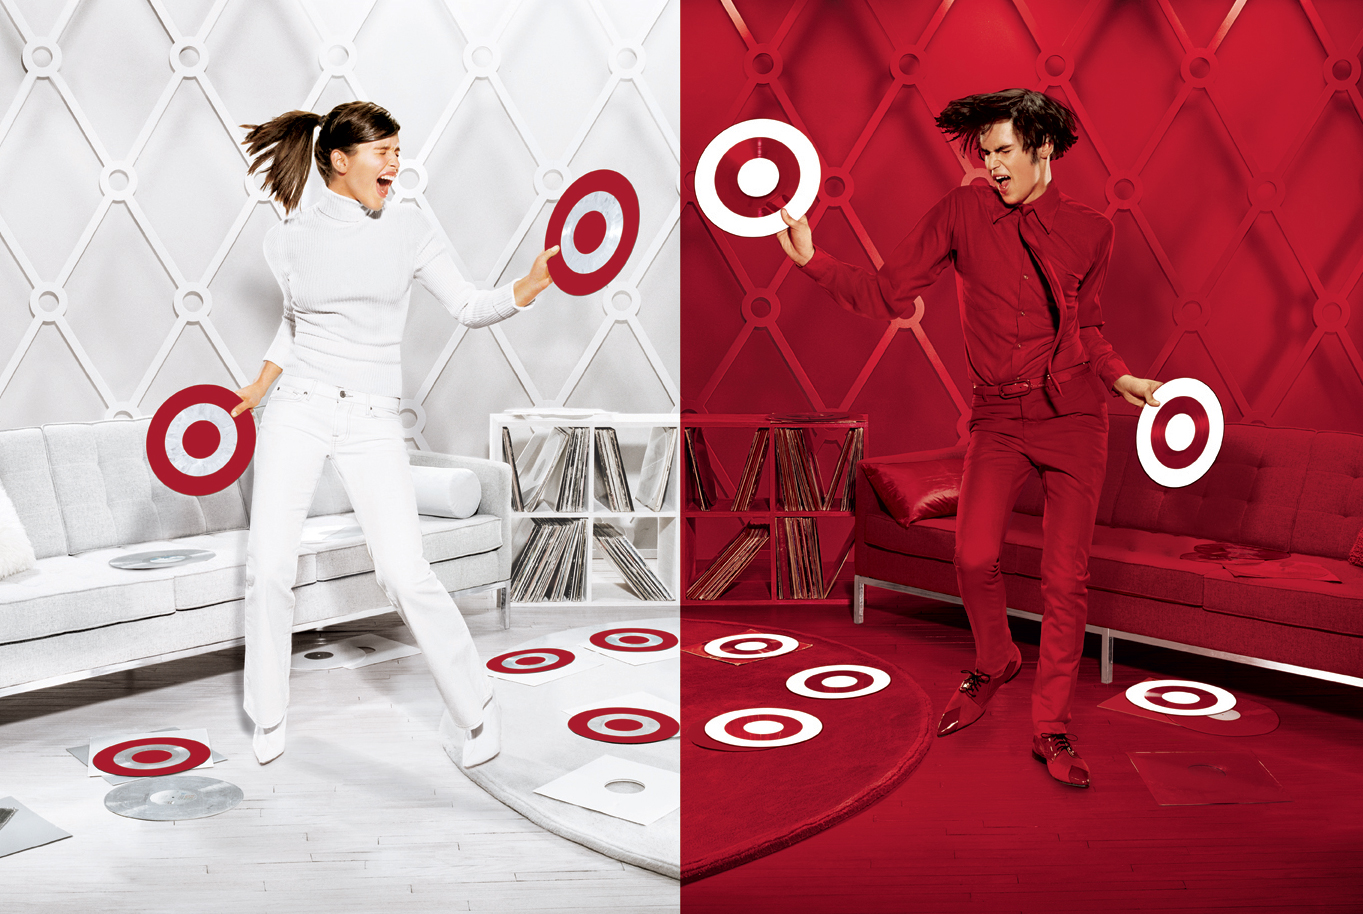 Target, Branding '05 twister couple campaign image